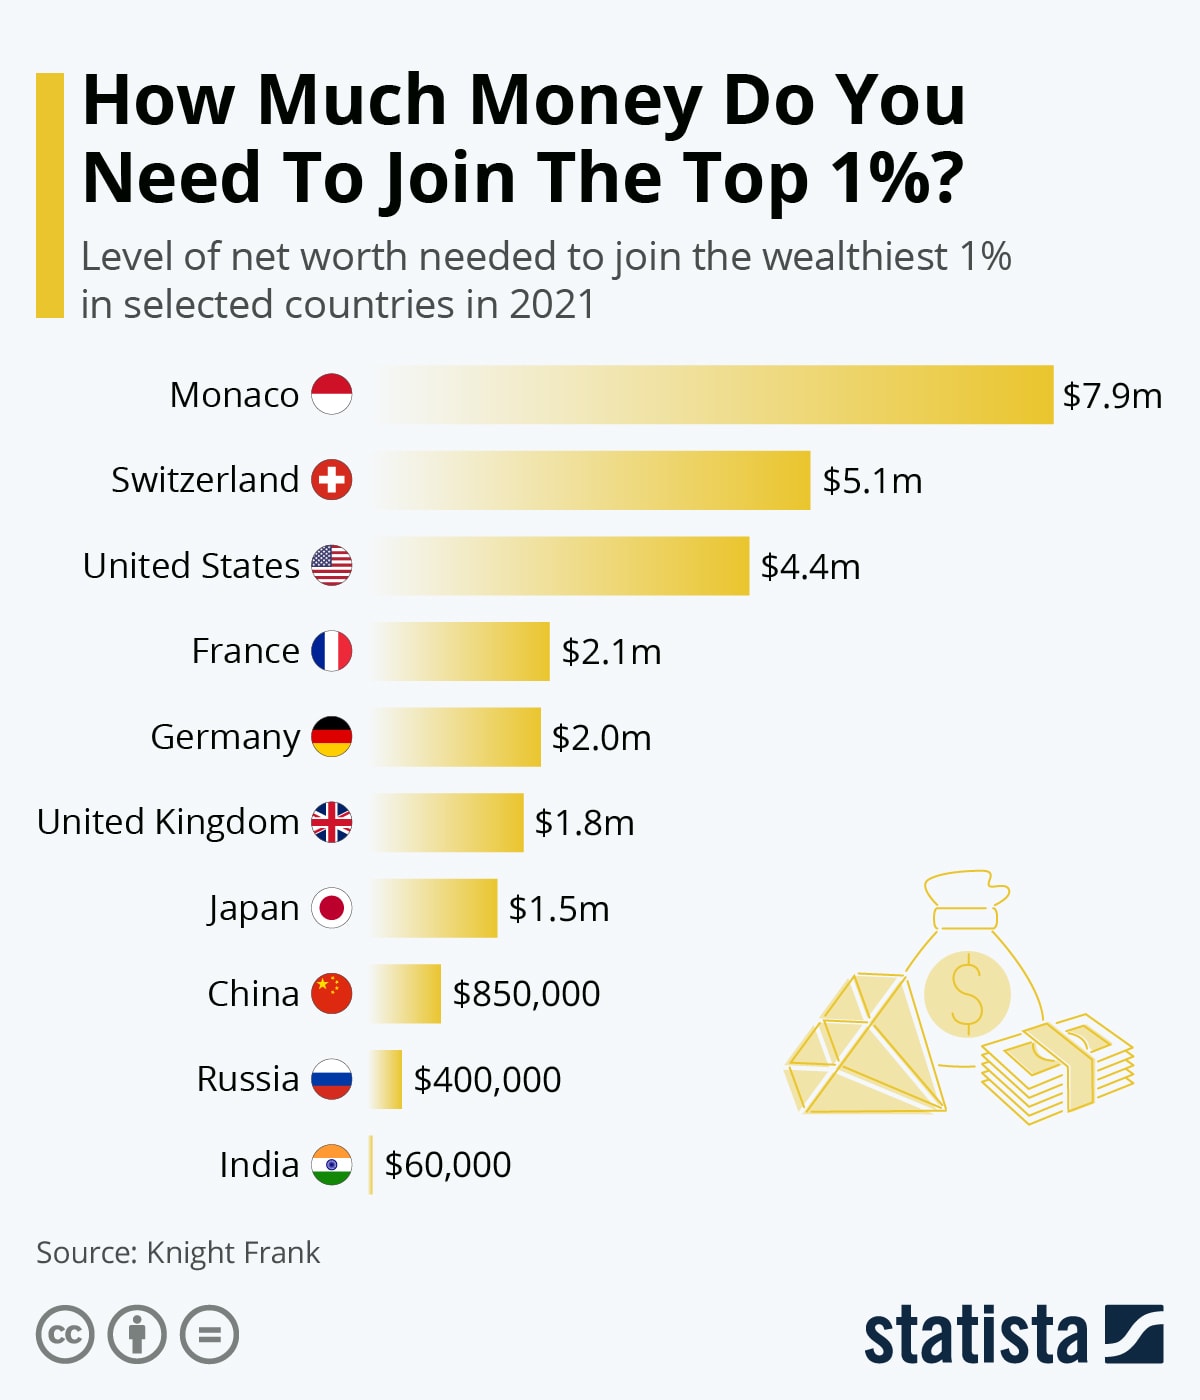 How Much Money Do You Need To Join The Top 1%